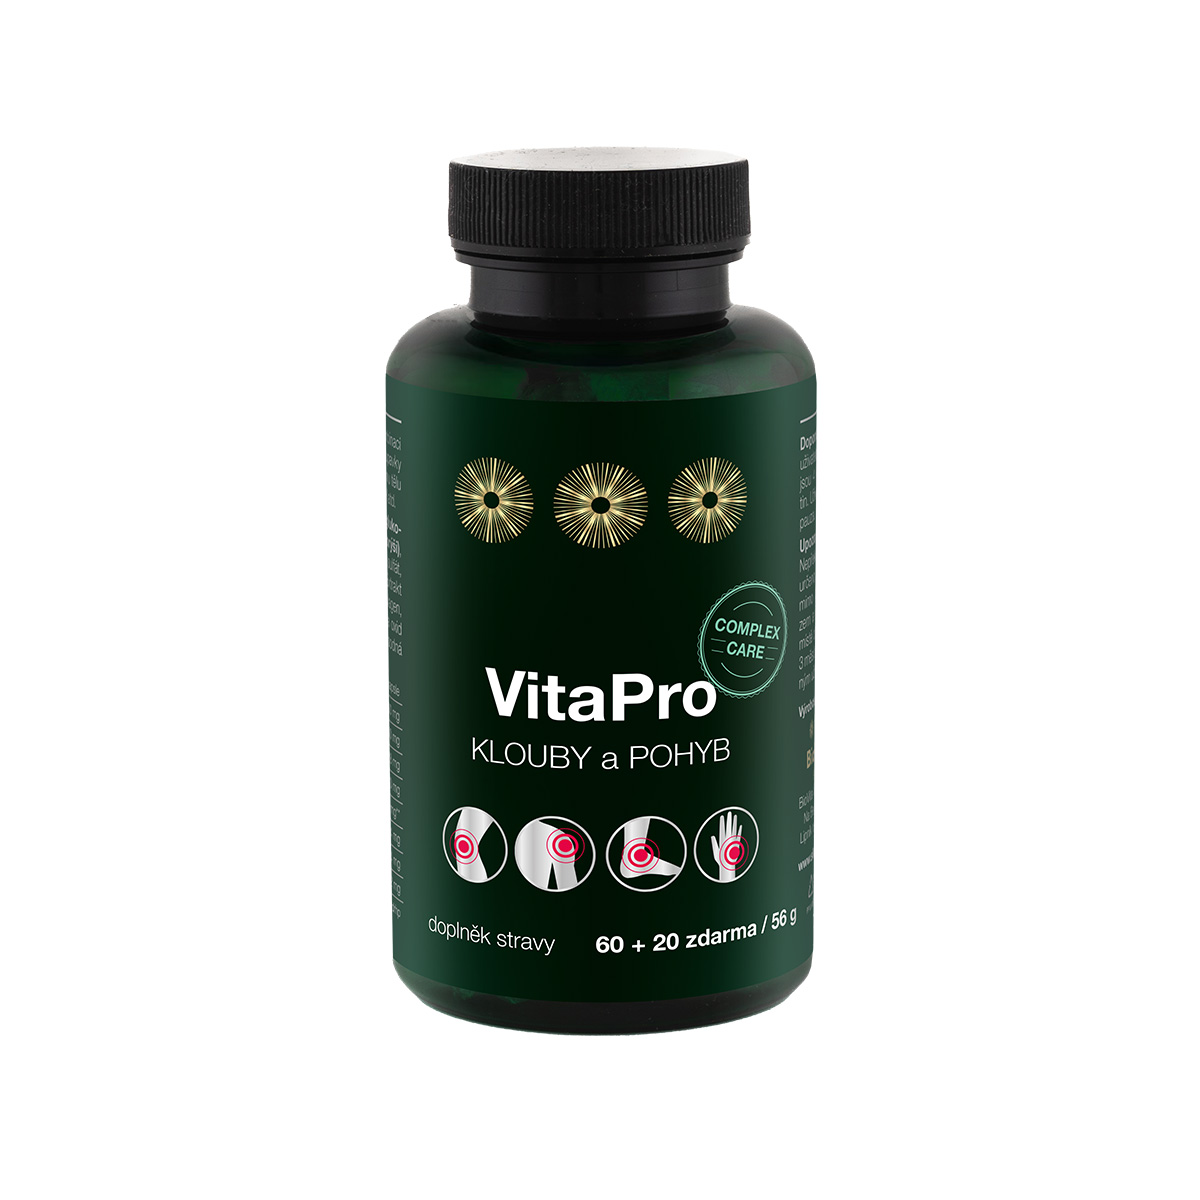 VitaPro klouby a pohyb 60 + 20 cps